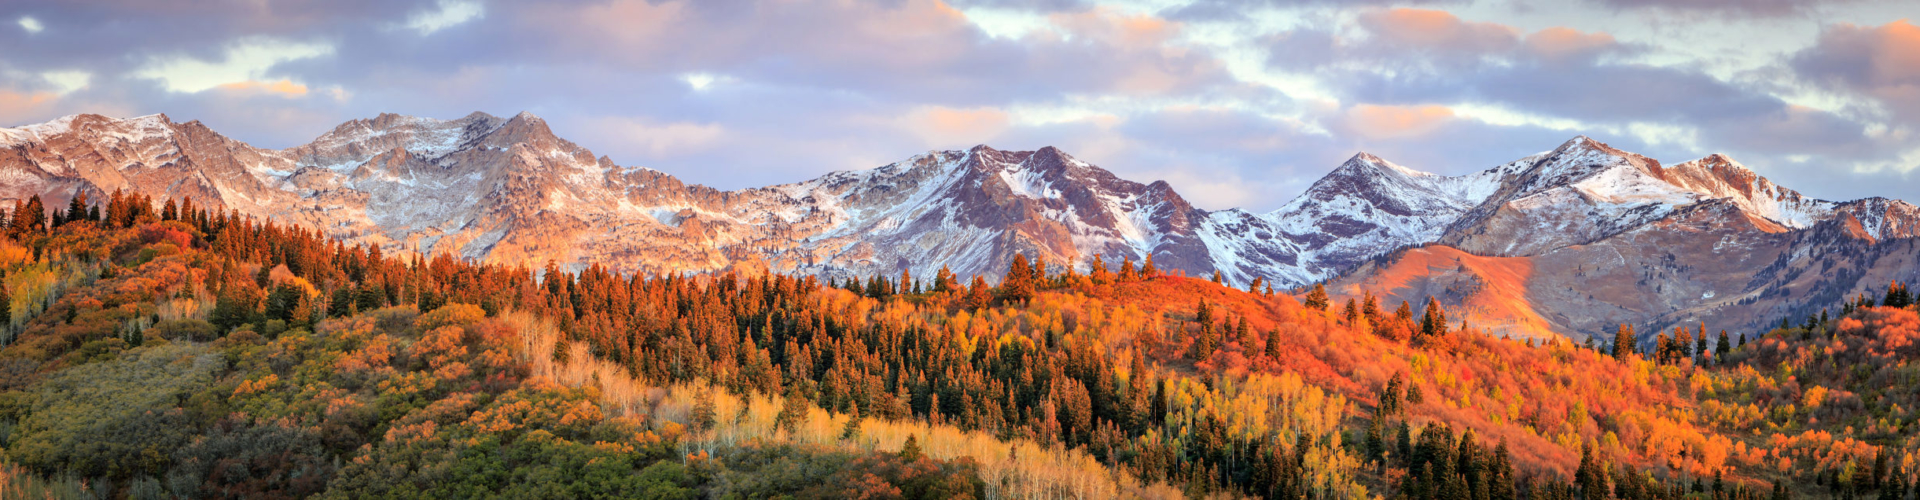 shutterstock_493754245Autumn sunrise panorama in the Wasatch Mountains